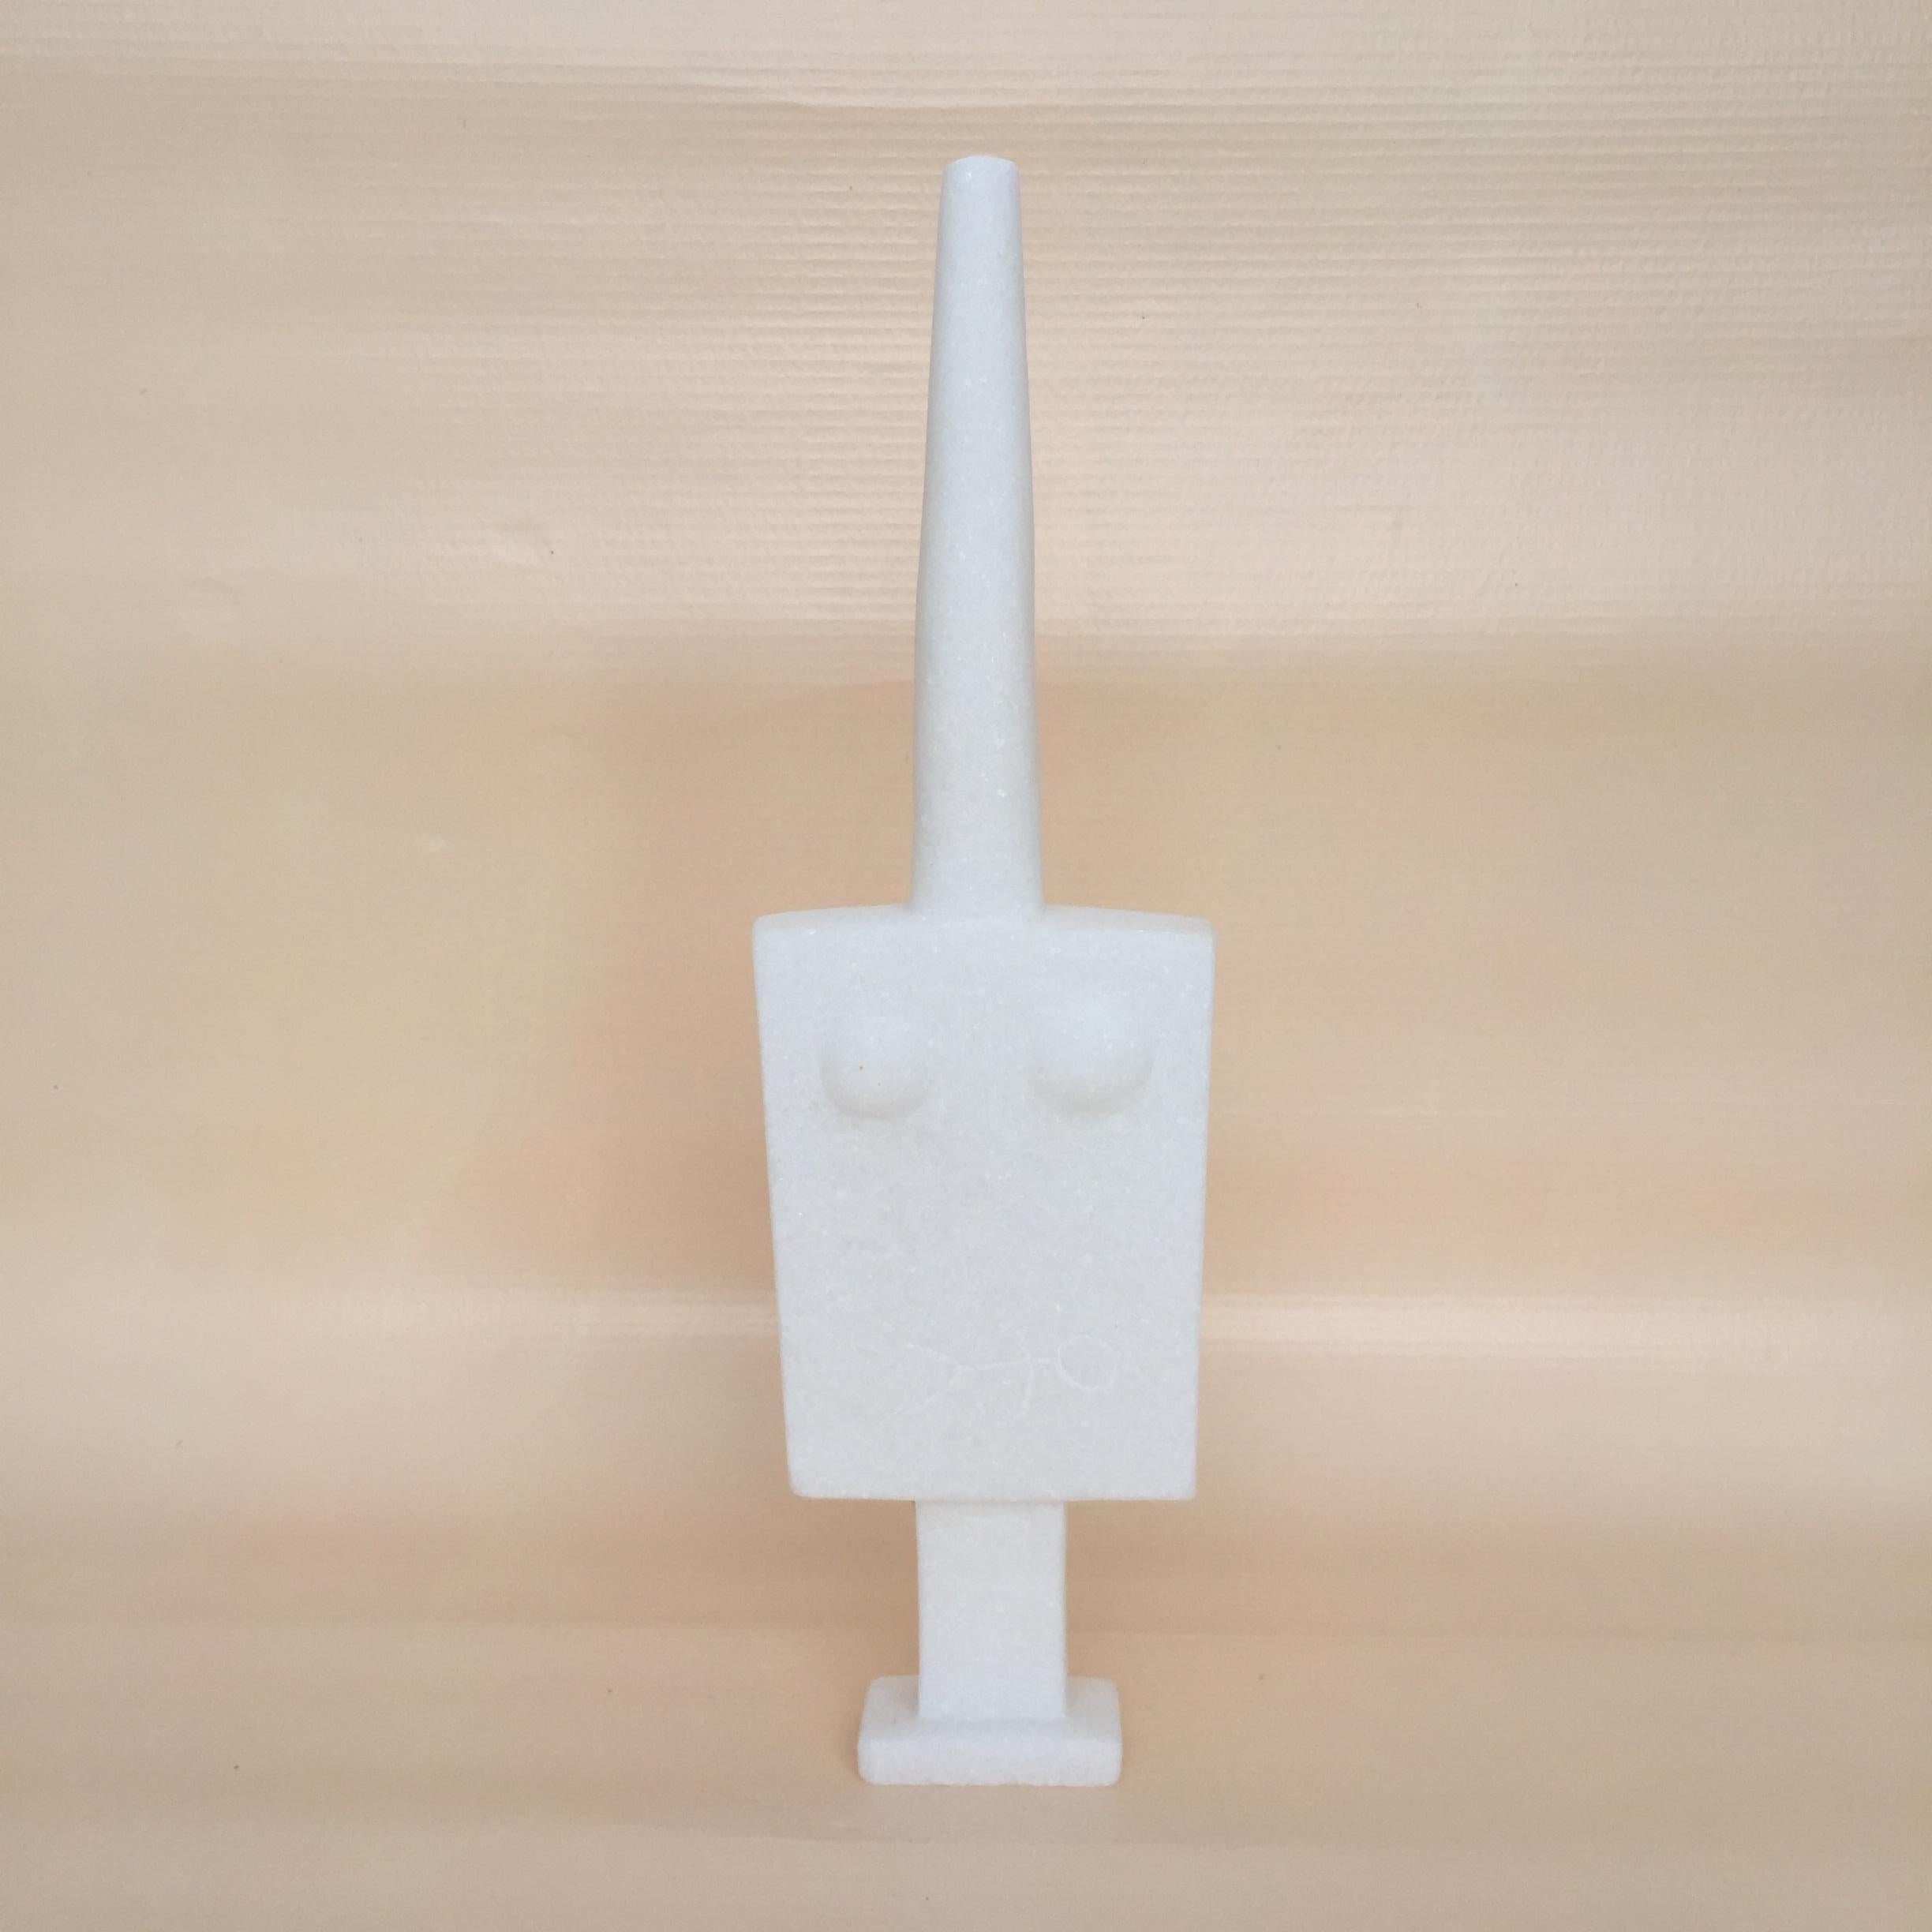 Marble sculpture by Tom von Kaenel
2018
Dimensions: H 42 cm
Materials: Naxian marble

All the artworks of Tom von Kaenel are unique, handcrafted by himself.
The stones all come from the surrounding marble quarries of the island. The Naxian